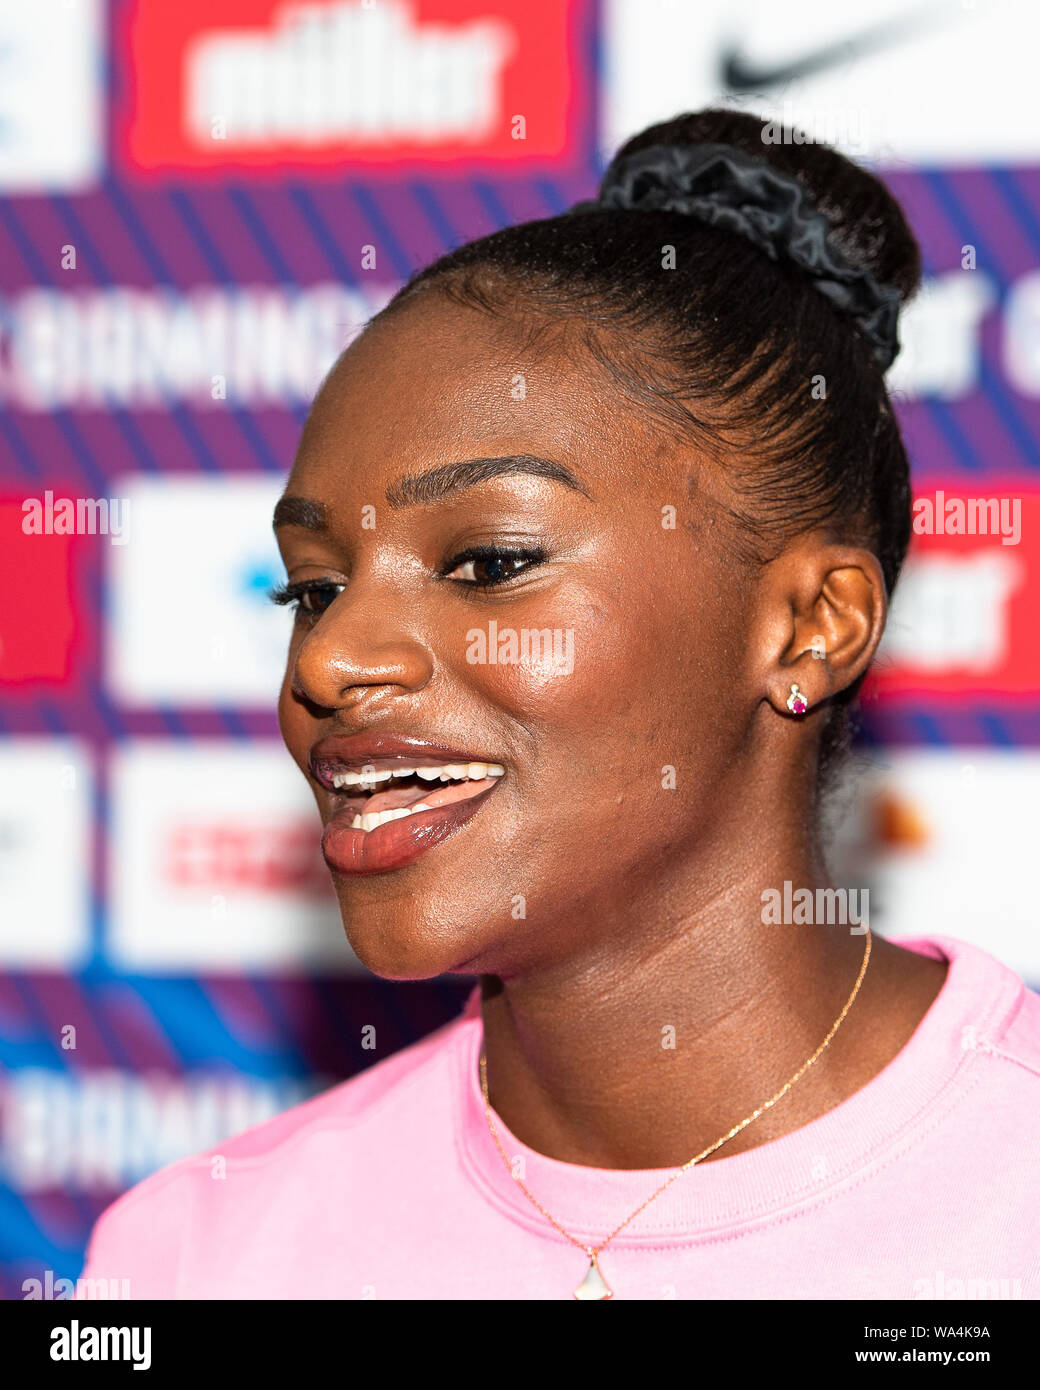 BIRMINGHAM, UNITED KINGDOM. 17th Aug, 2019. Dina Asher-Smith of Great Britain (200m - Triple European Cahmpion & multi-global medallist) during Muller Grand Prix Birmingham 2019 Pre-Event Press Conference at Crowne Plaza Hotel on Saturday, August 17, 2019 in BIRMINGHAM ENGLAND. Credit: Taka G Wu/Alamy Live News Stock Photo